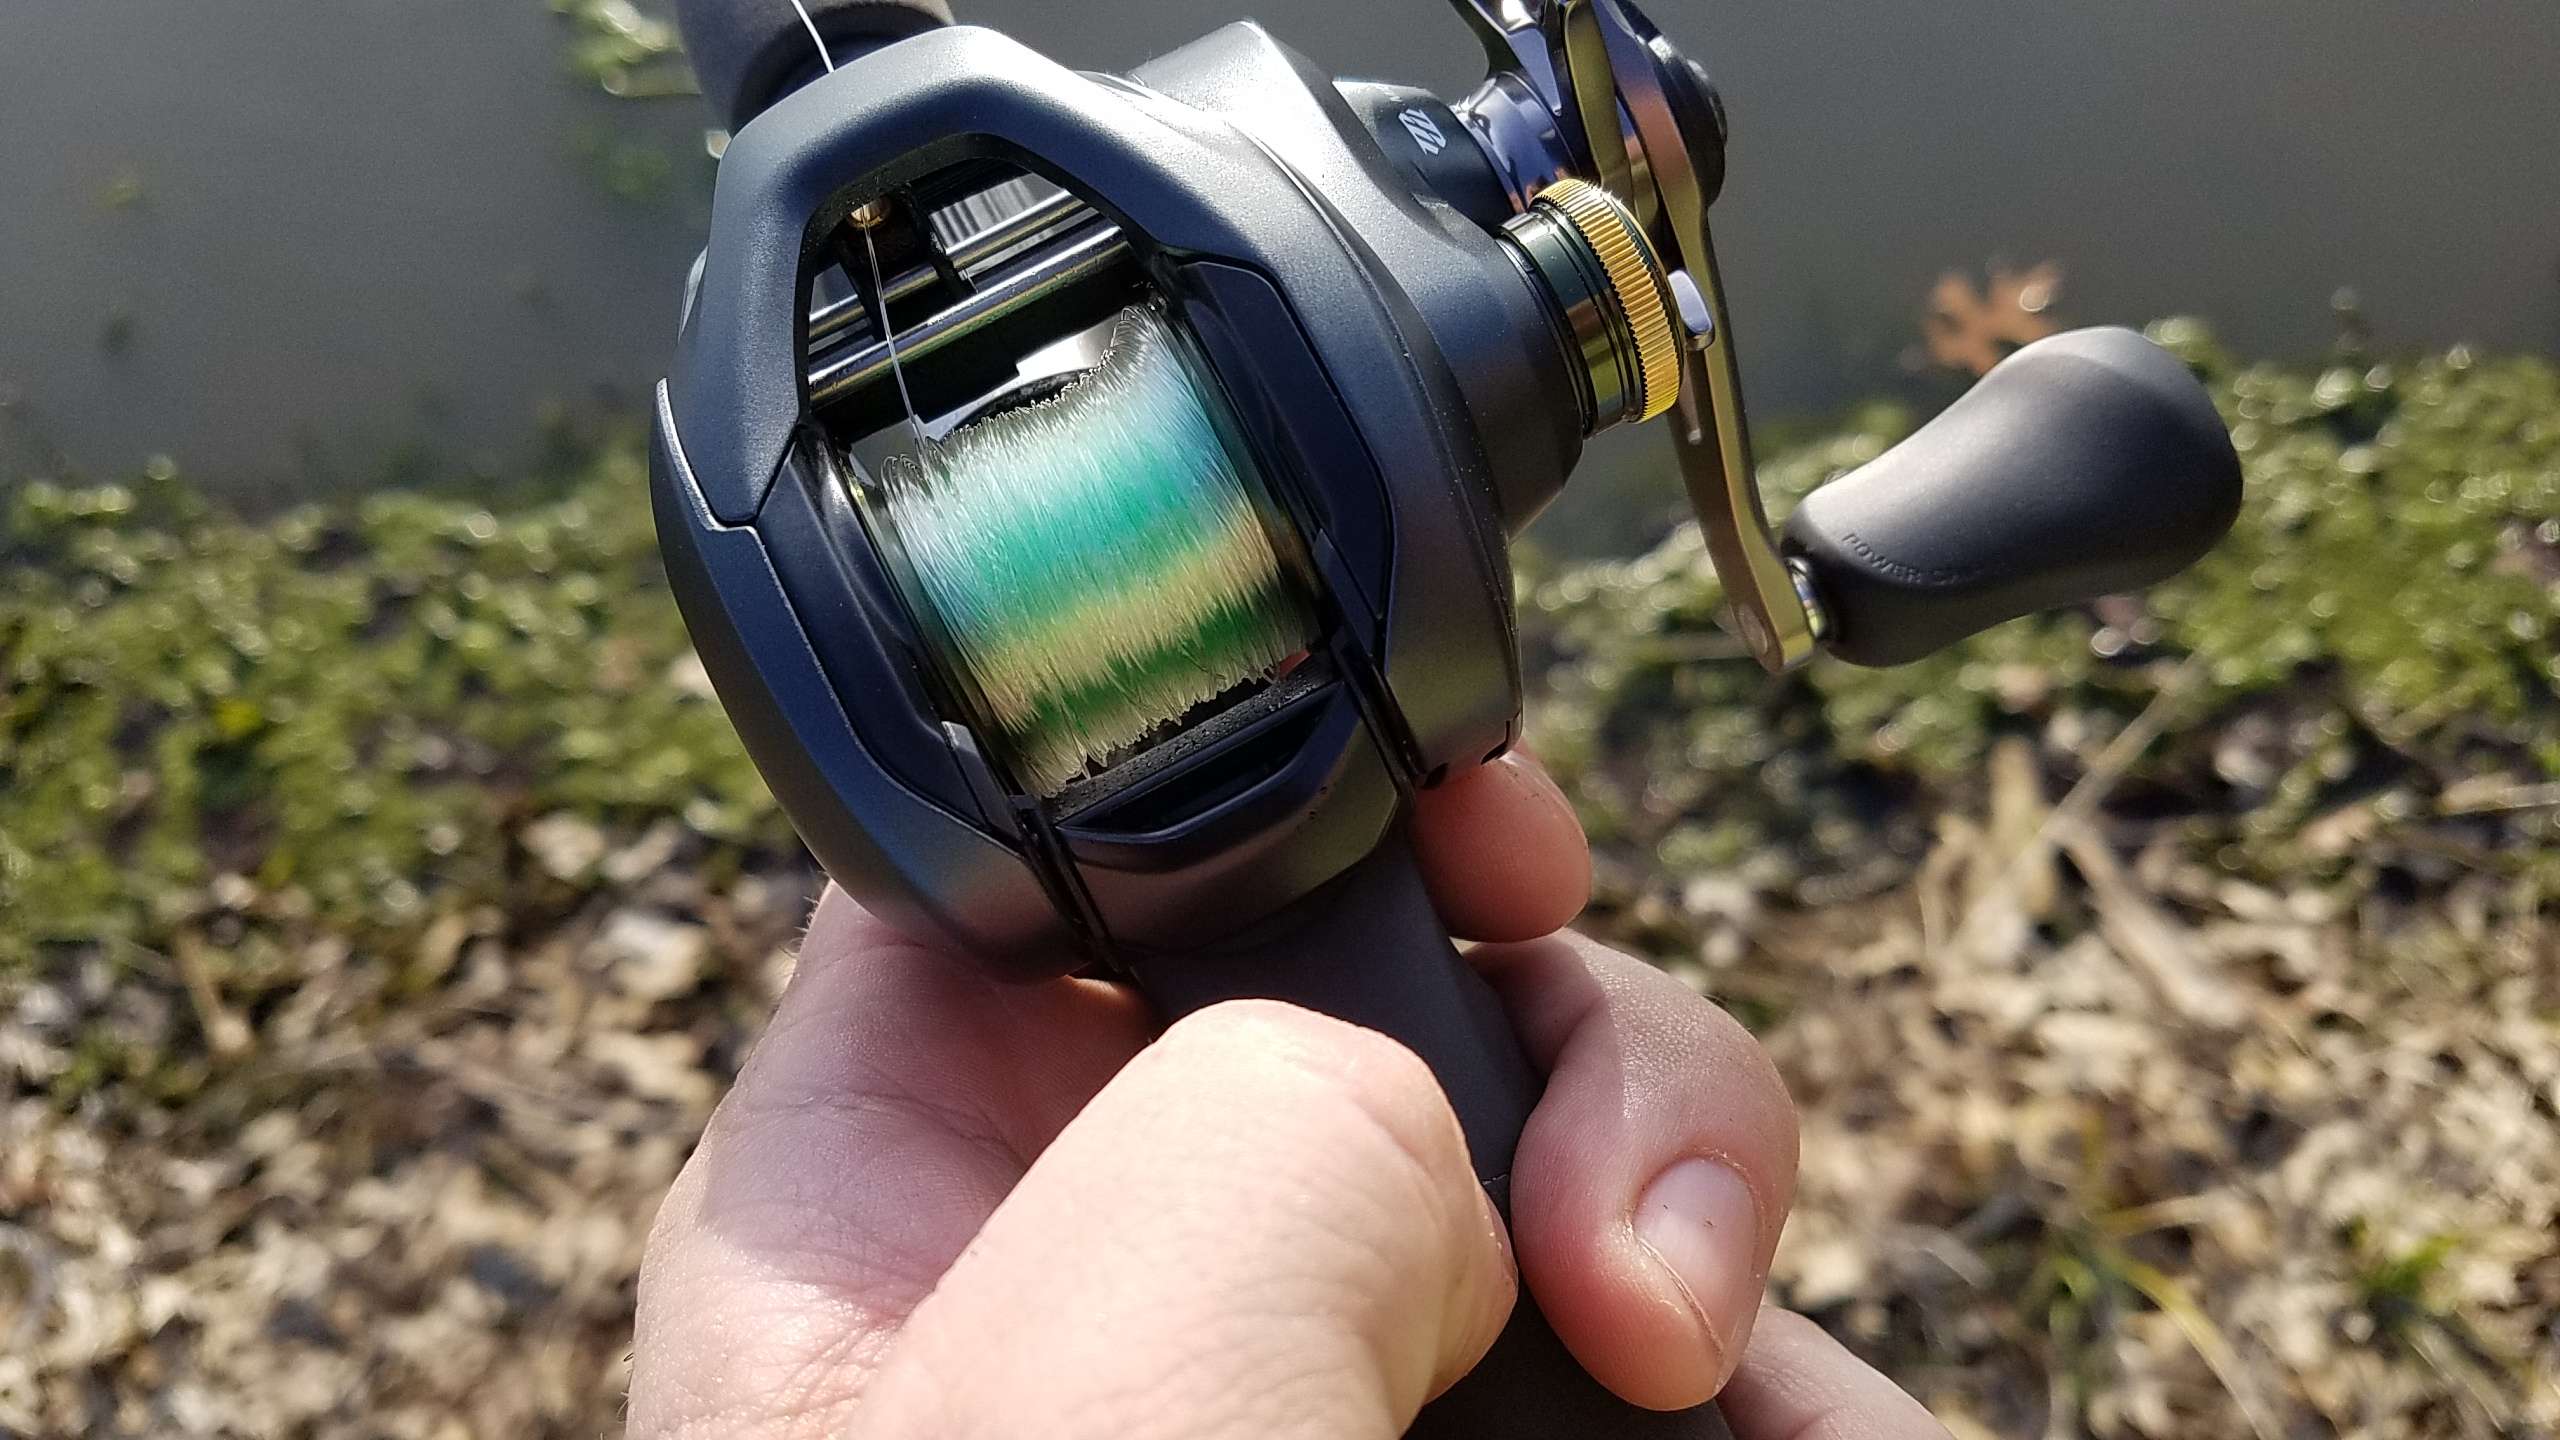 How To Fix Loose Reel Handle? - Fishing Rods, Reels, Line, and